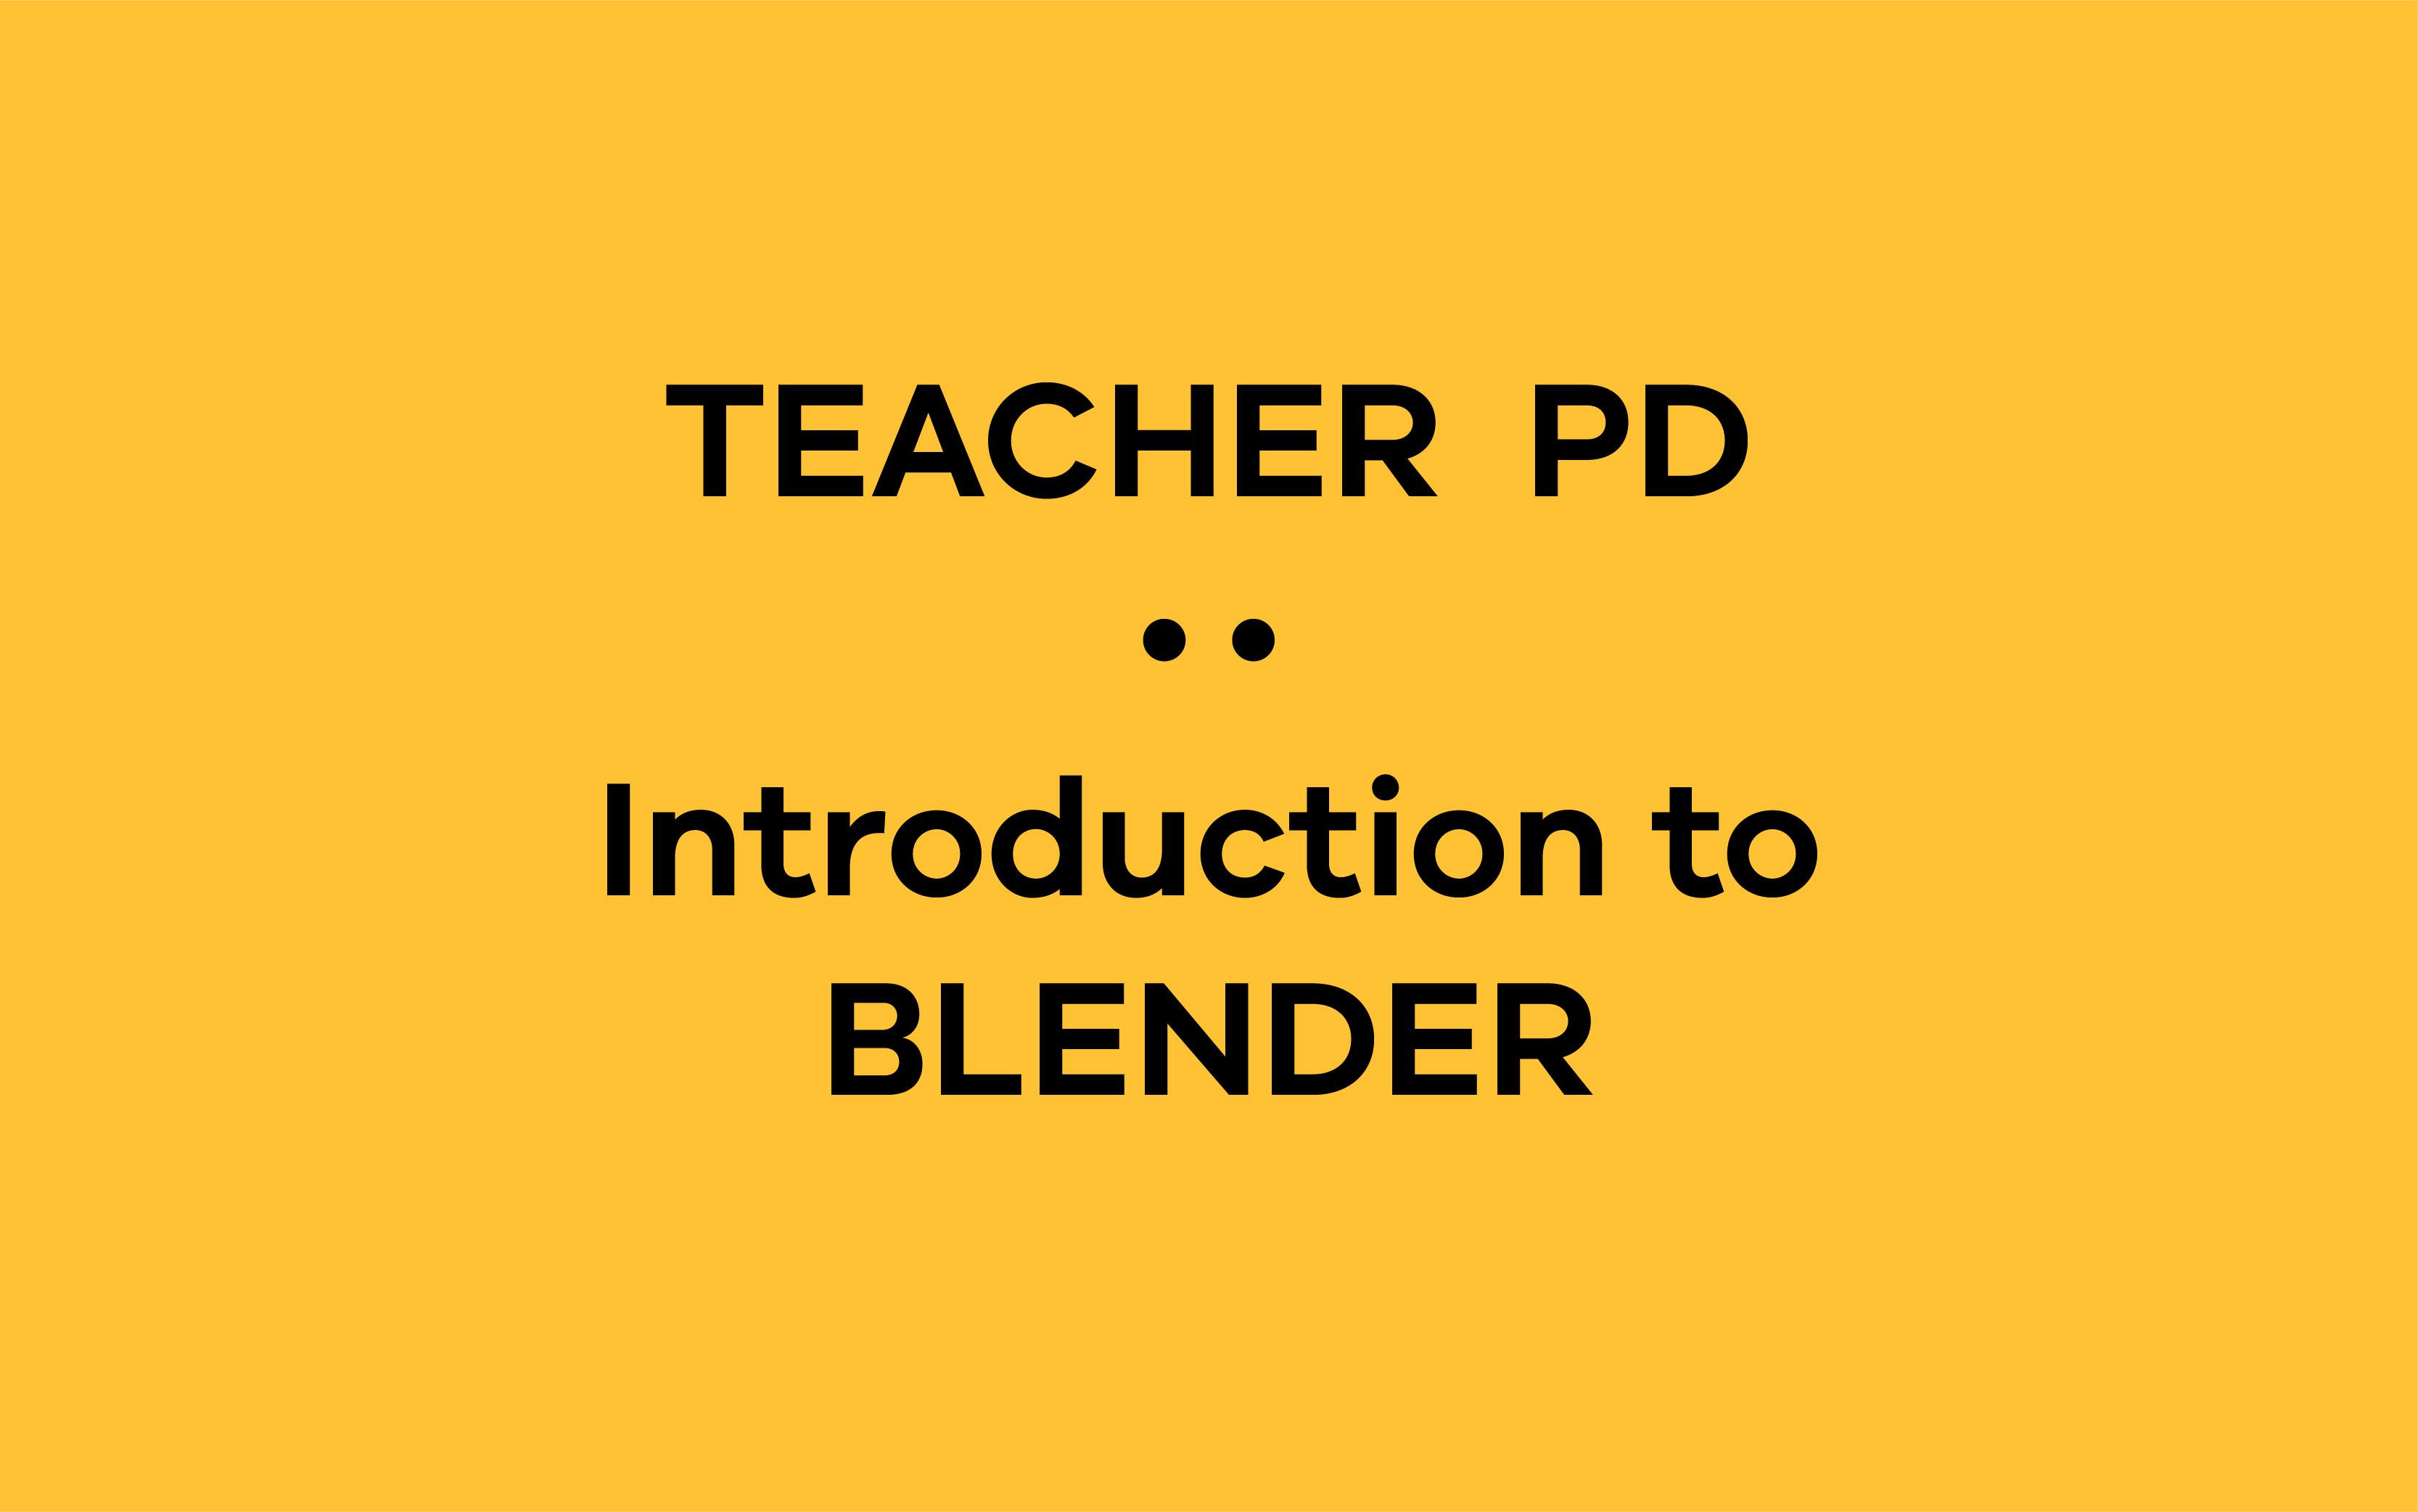 Introduction to: BLENDER